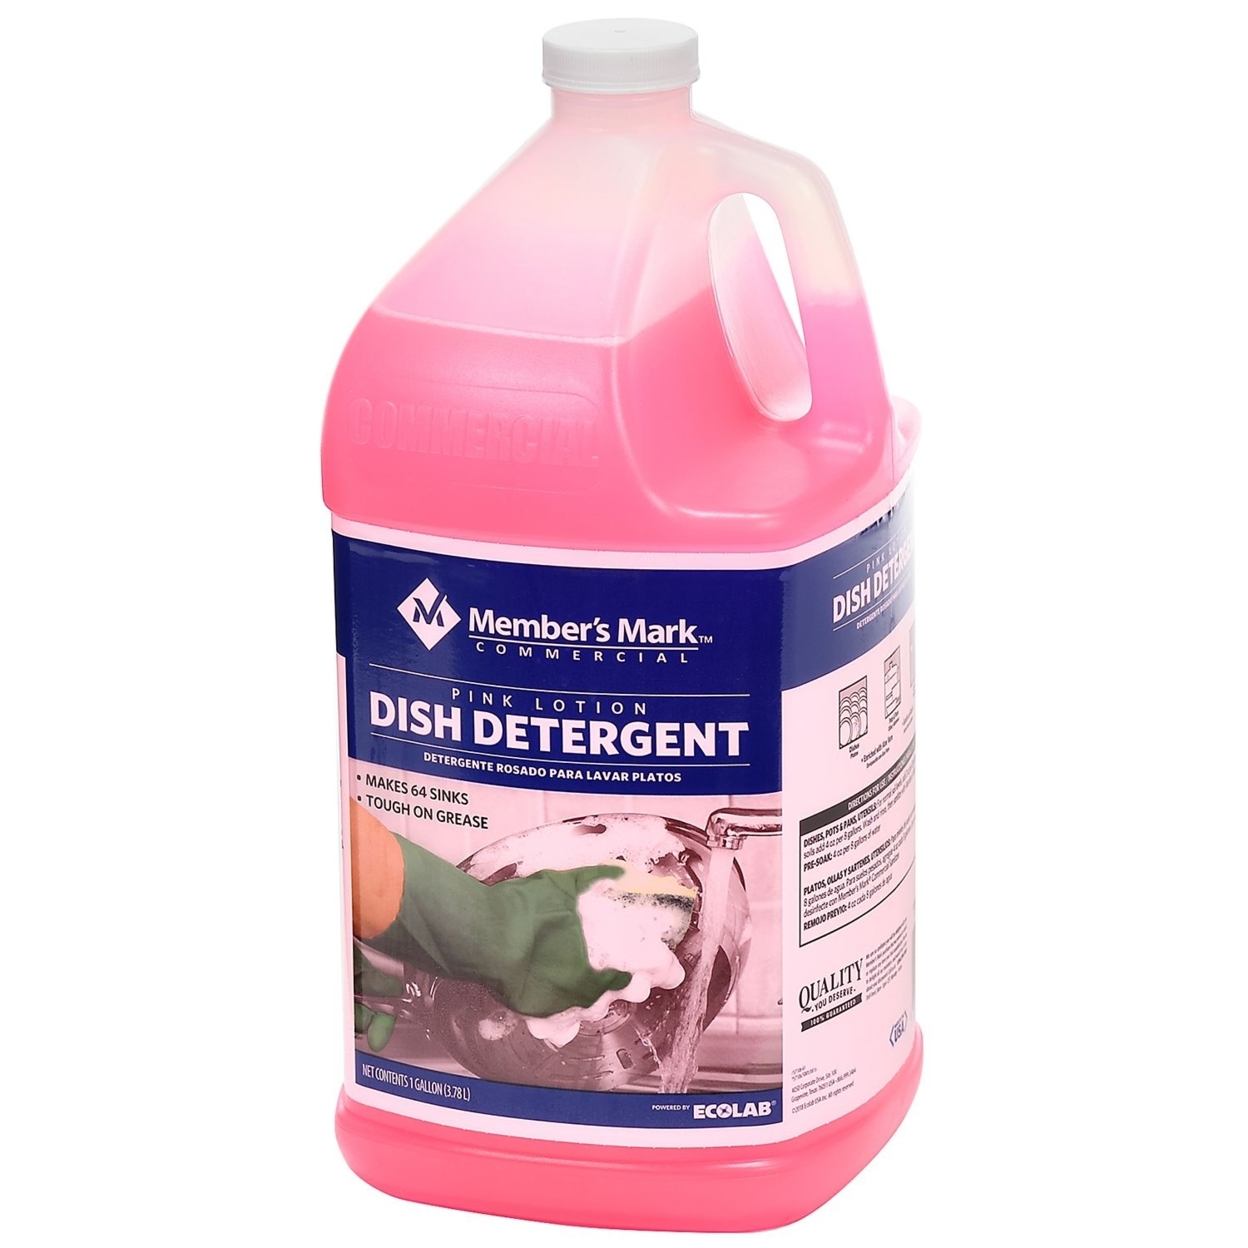 Member's Mark Commercial Pink Lotion Dish Detergent (1 Gallon)